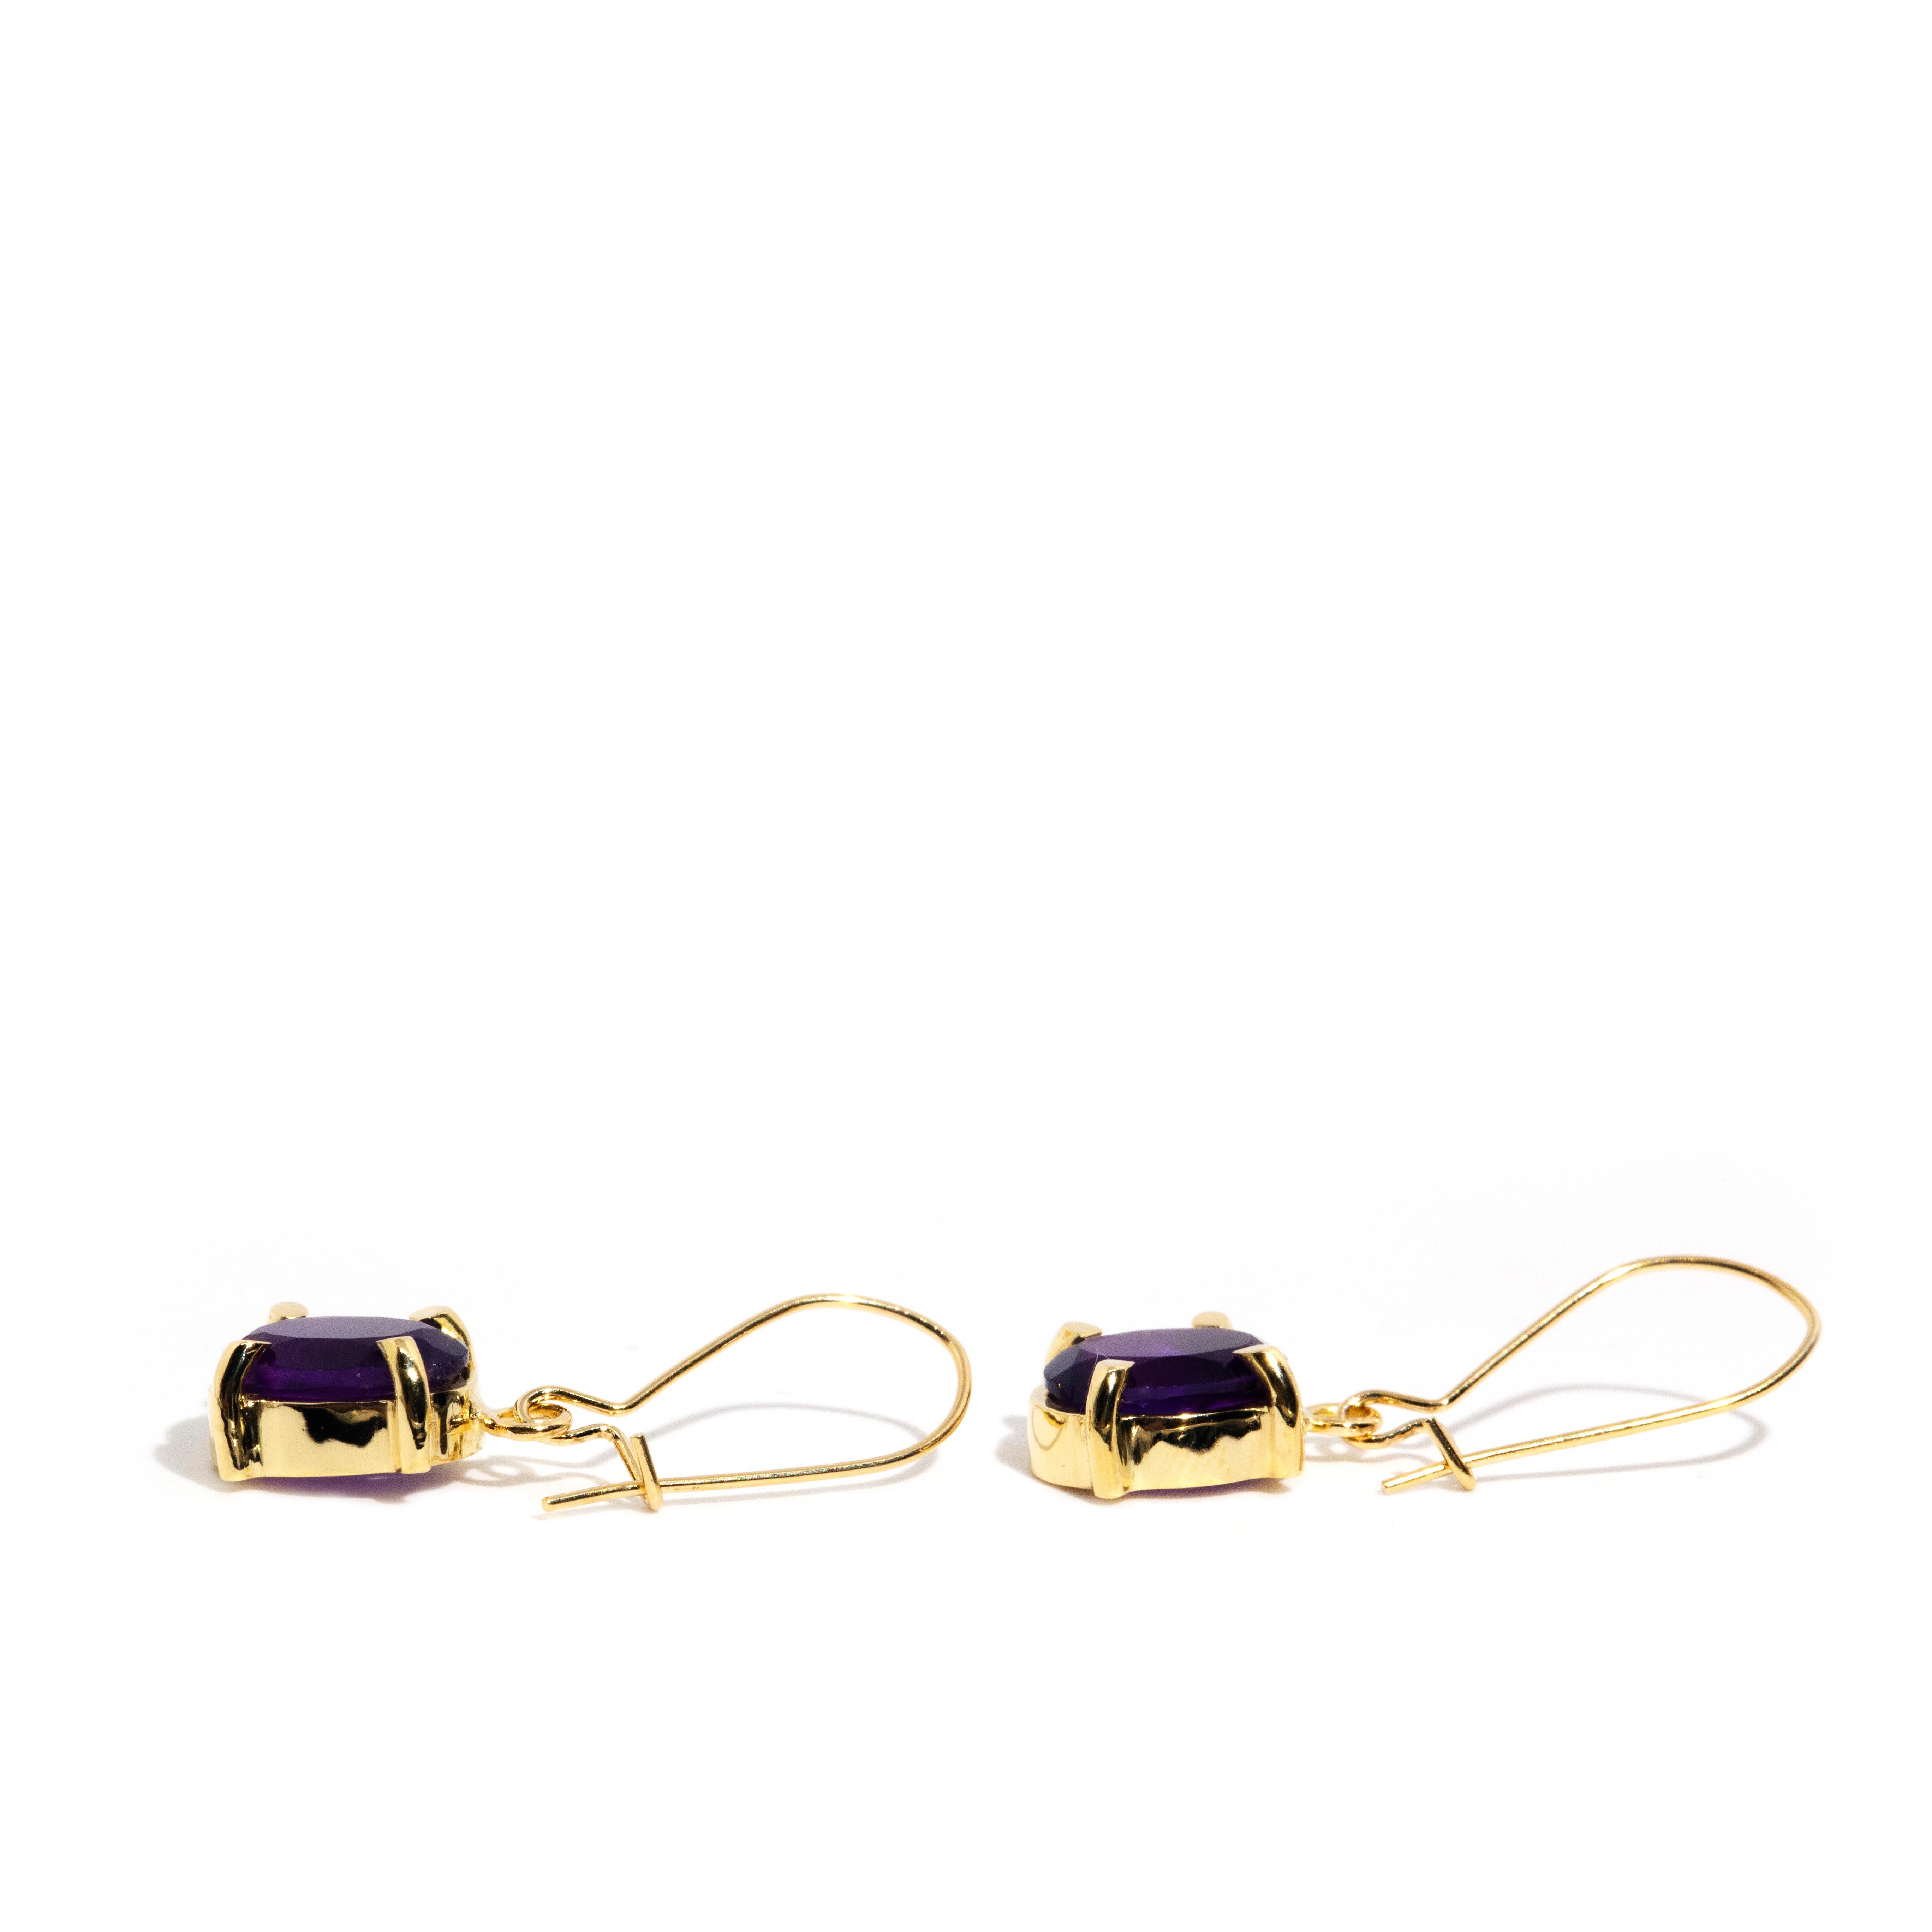 Oval Cut Vintage Circa 1990s 9 Carat Yellow Gold Amethyst Continental Hook Style Earrings